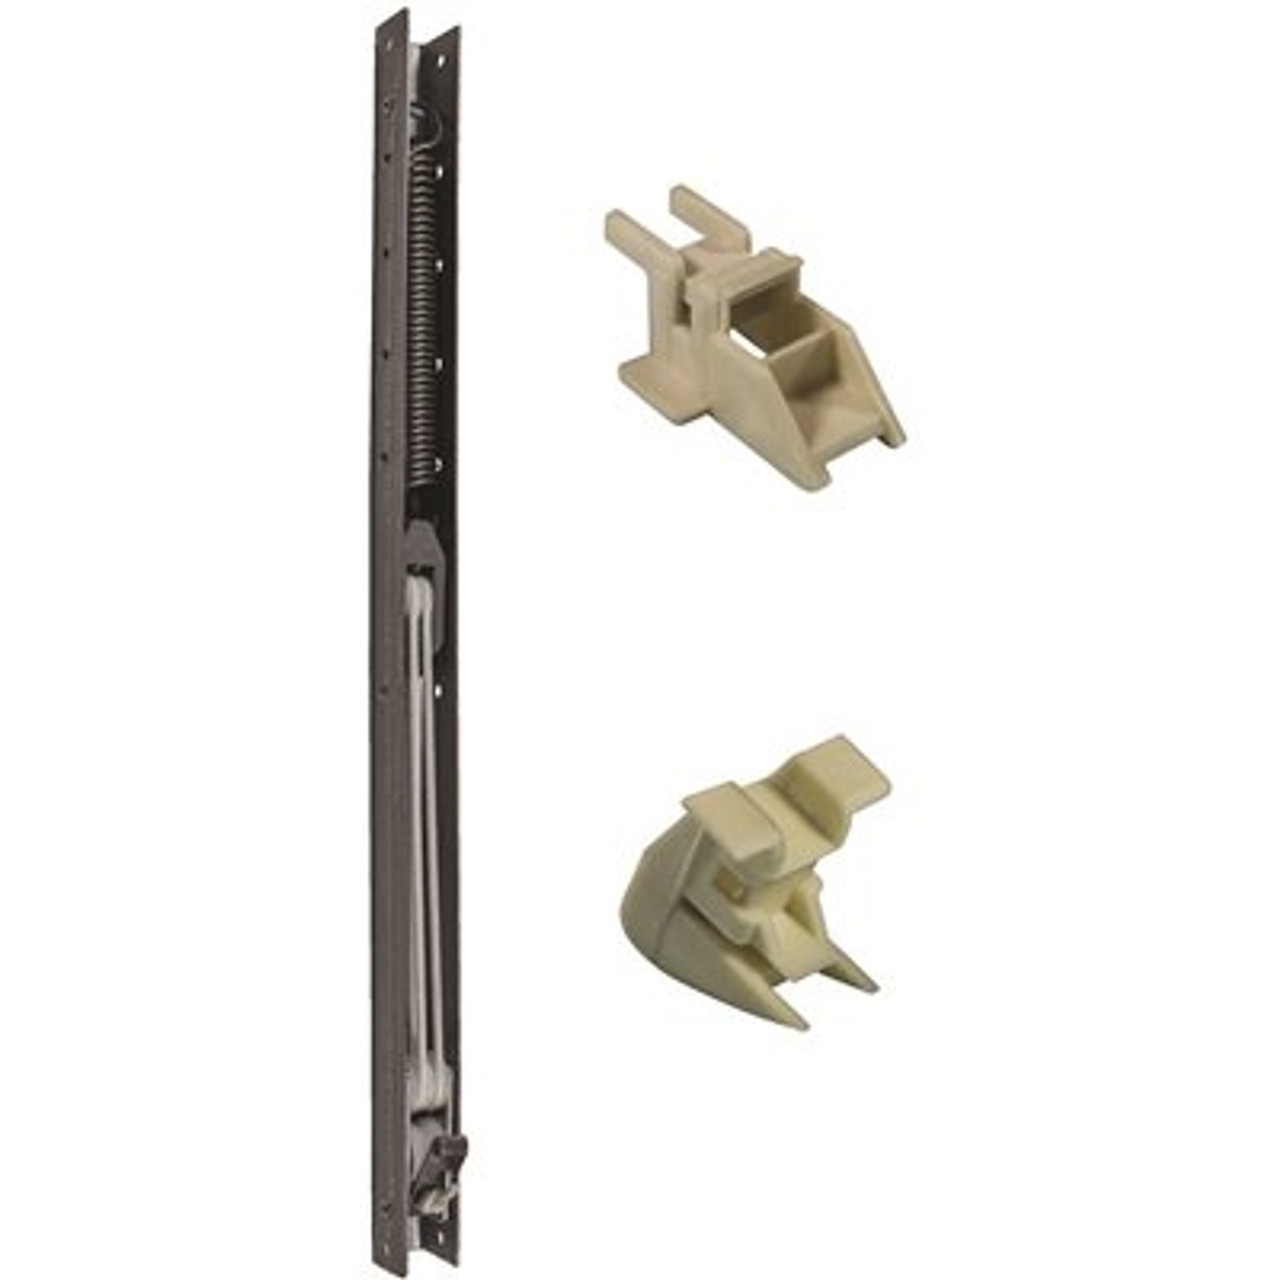 21 In. L Window Channel Balance 2010 With 9/16 In. W X 5/8 In. D Top And Bottom End Brackets Attached - 314413292